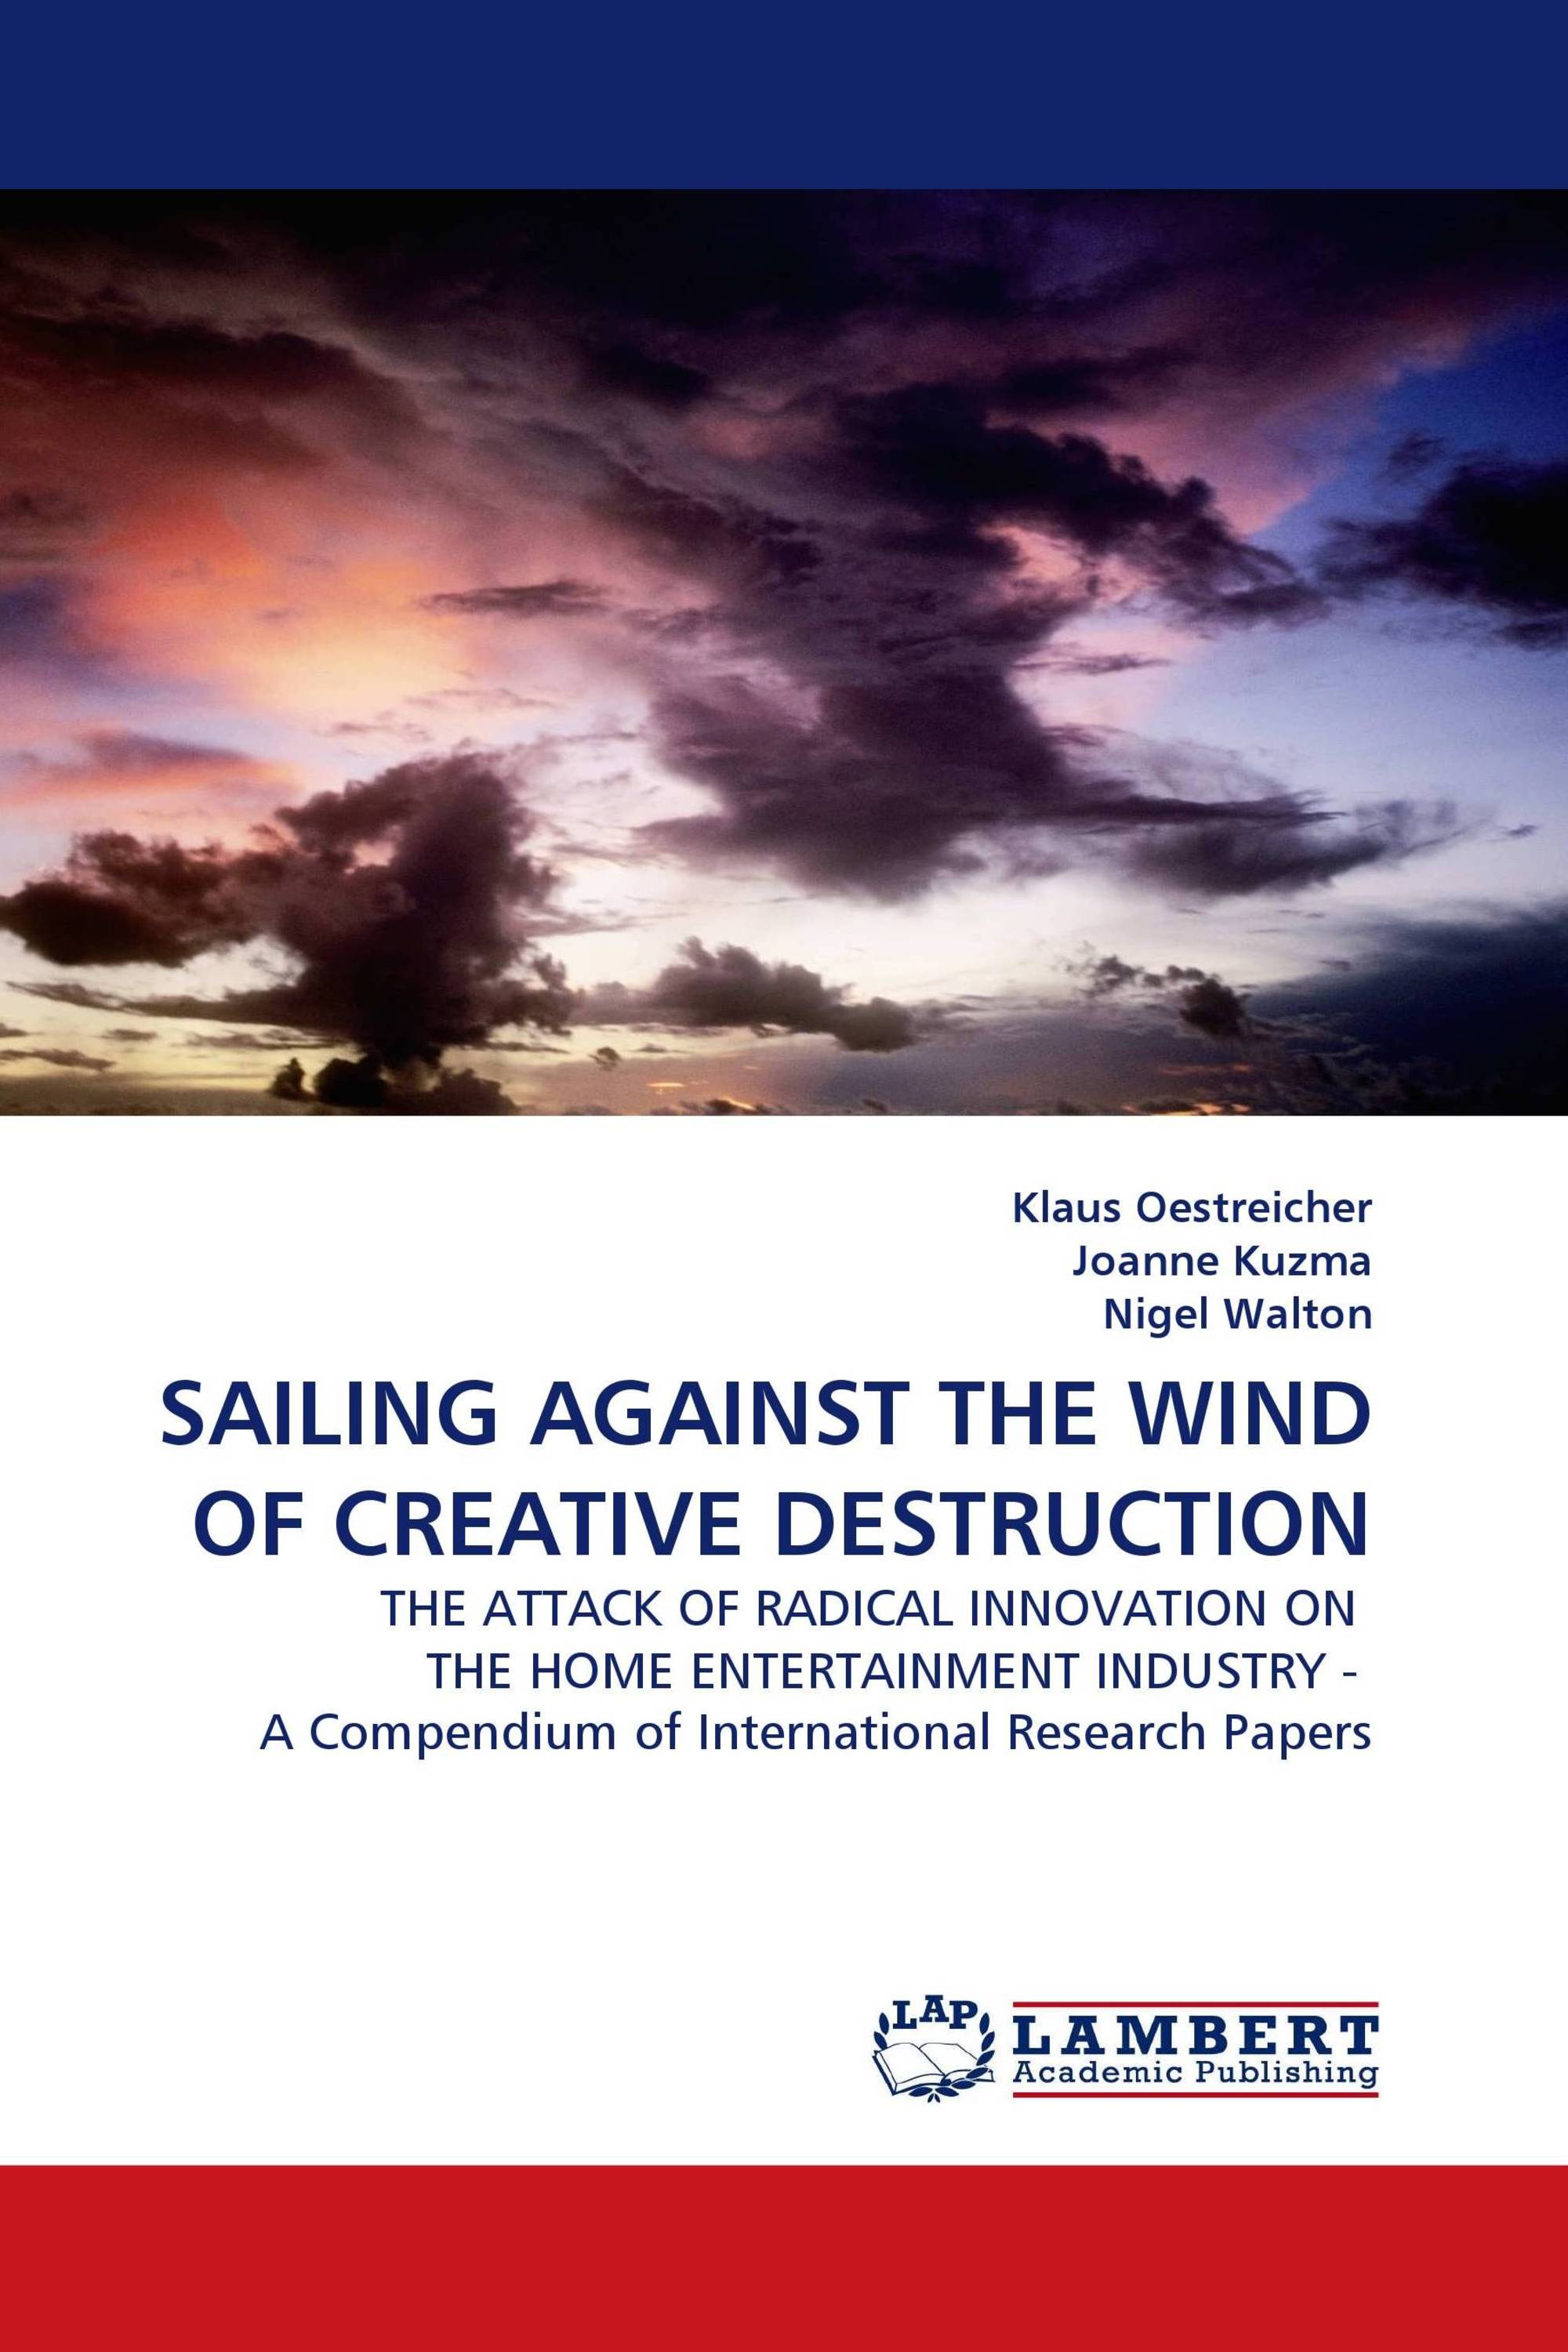 SAILING AGAINST THE WIND OF CREATIVE DESTRUCTION